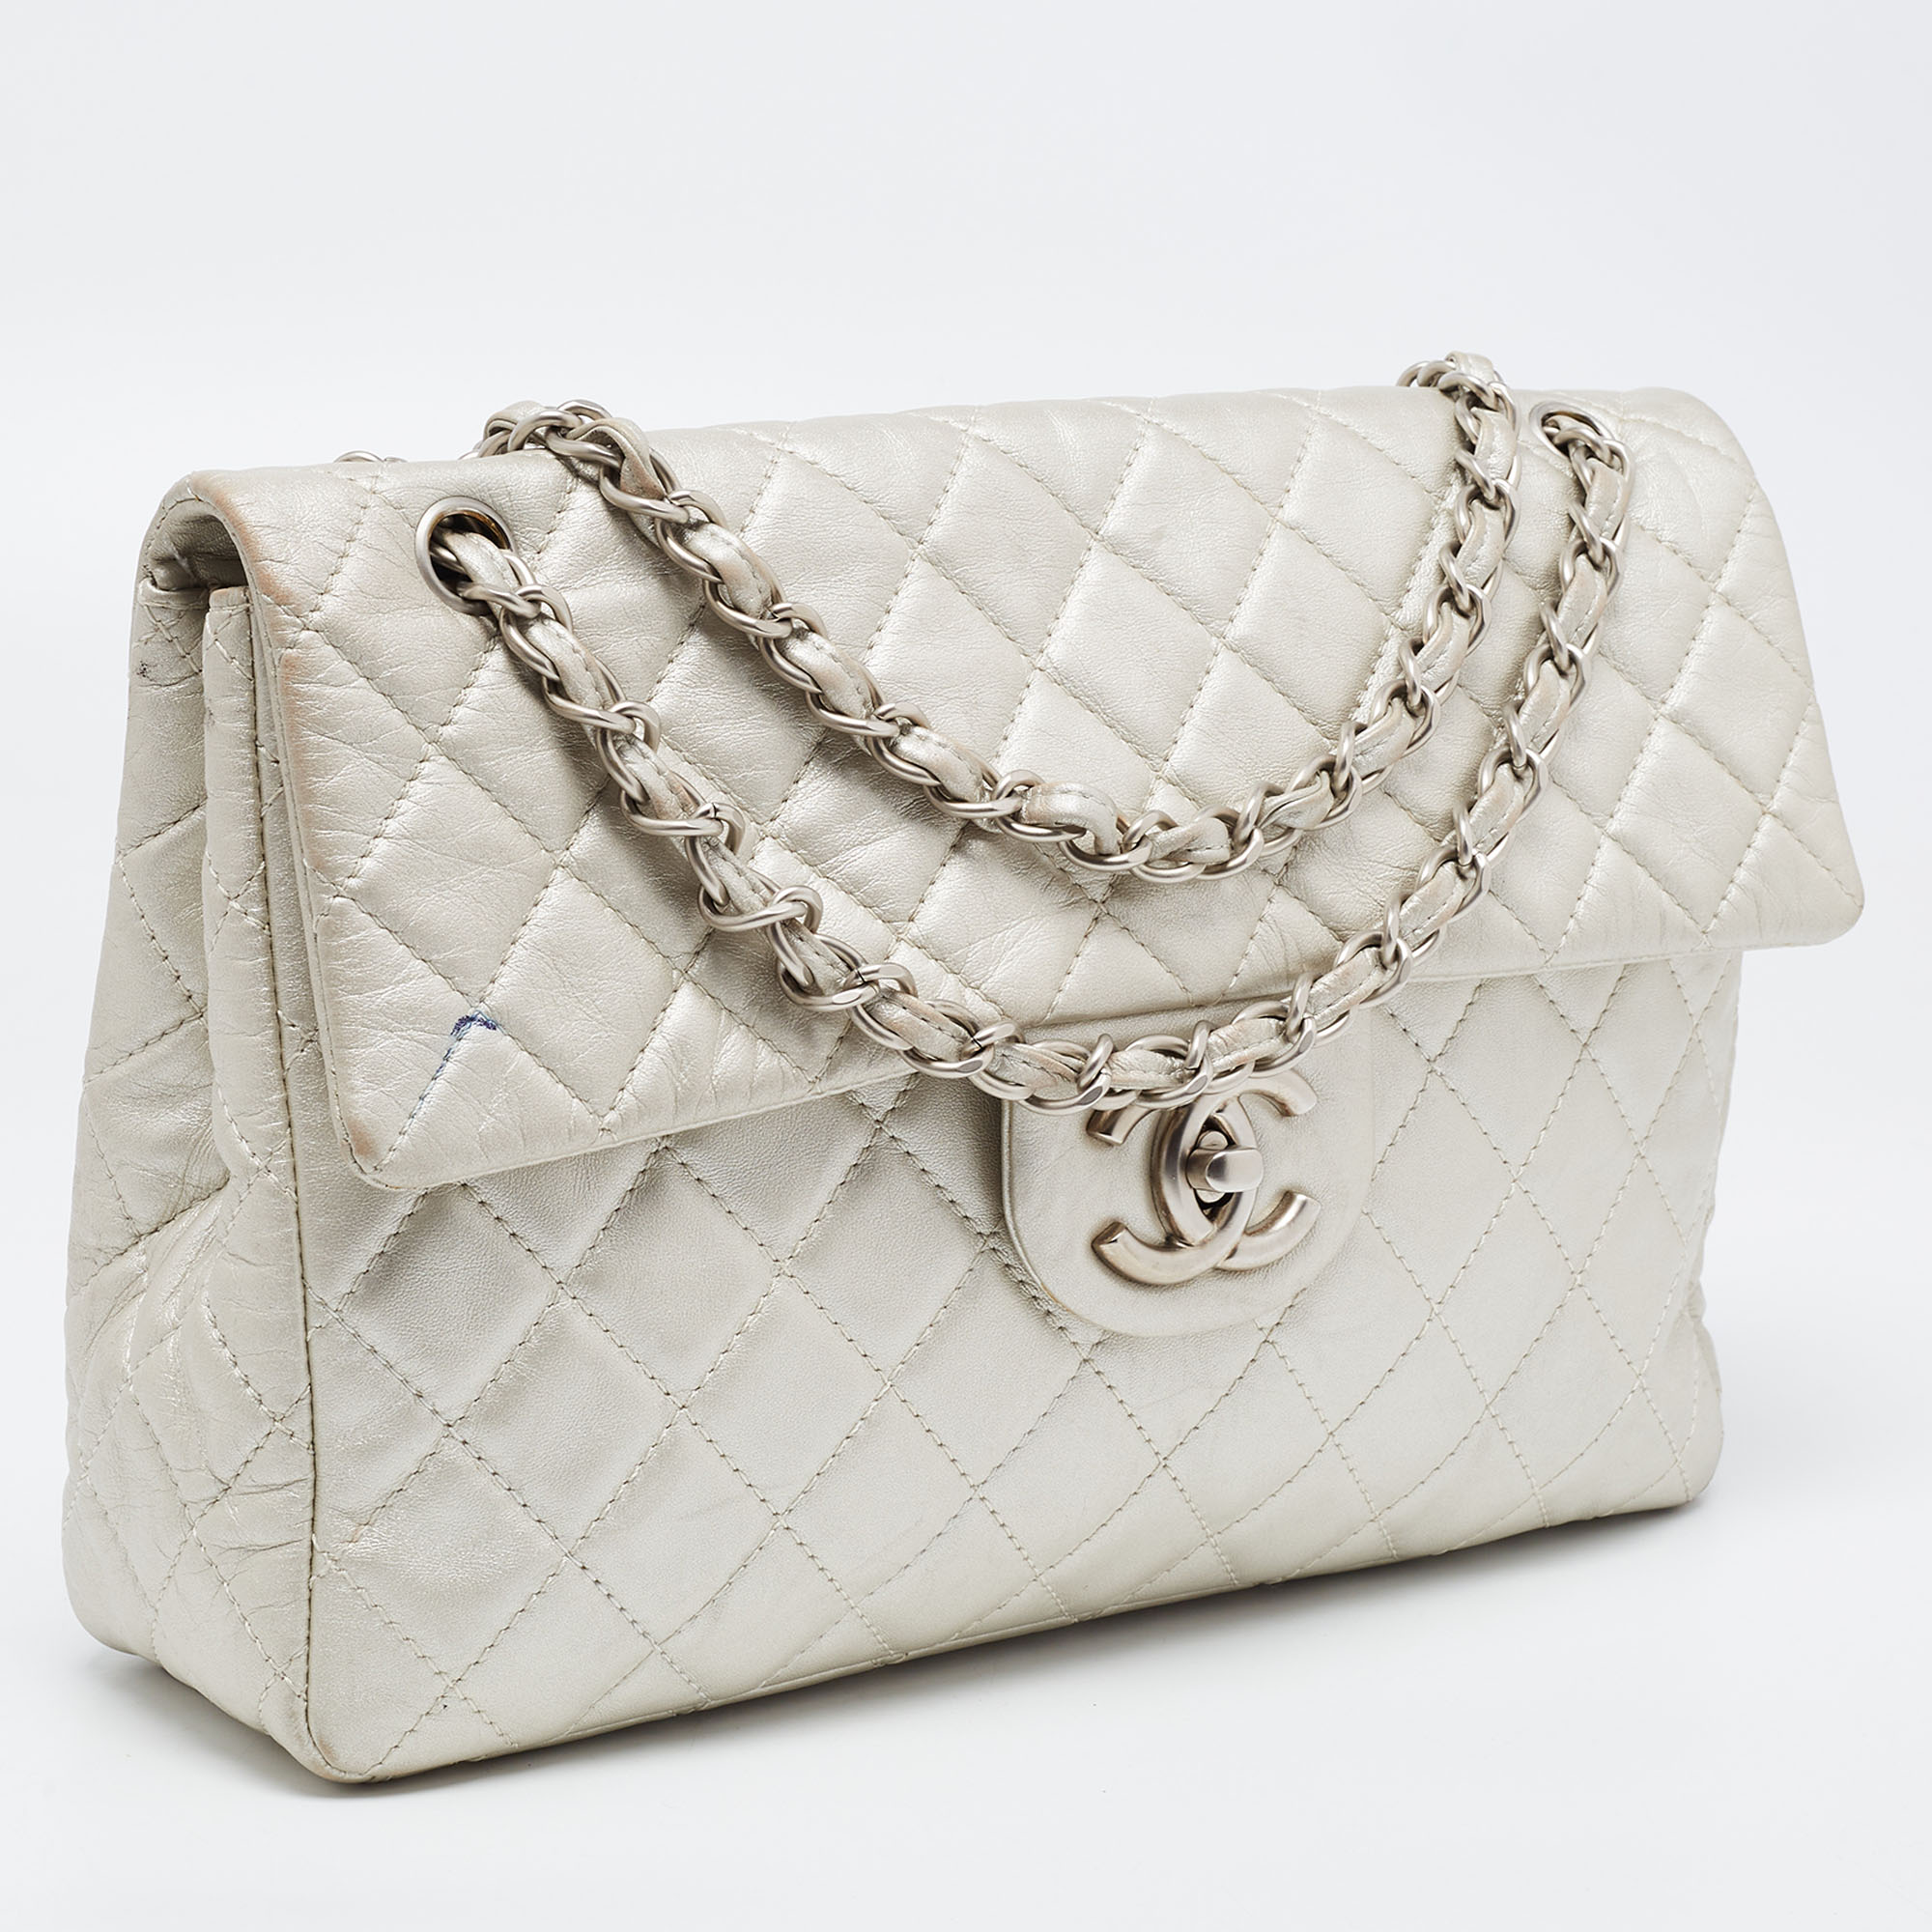 Chanel Metallic Grey Quilted Leather Maxi Classic Single Flap Bag